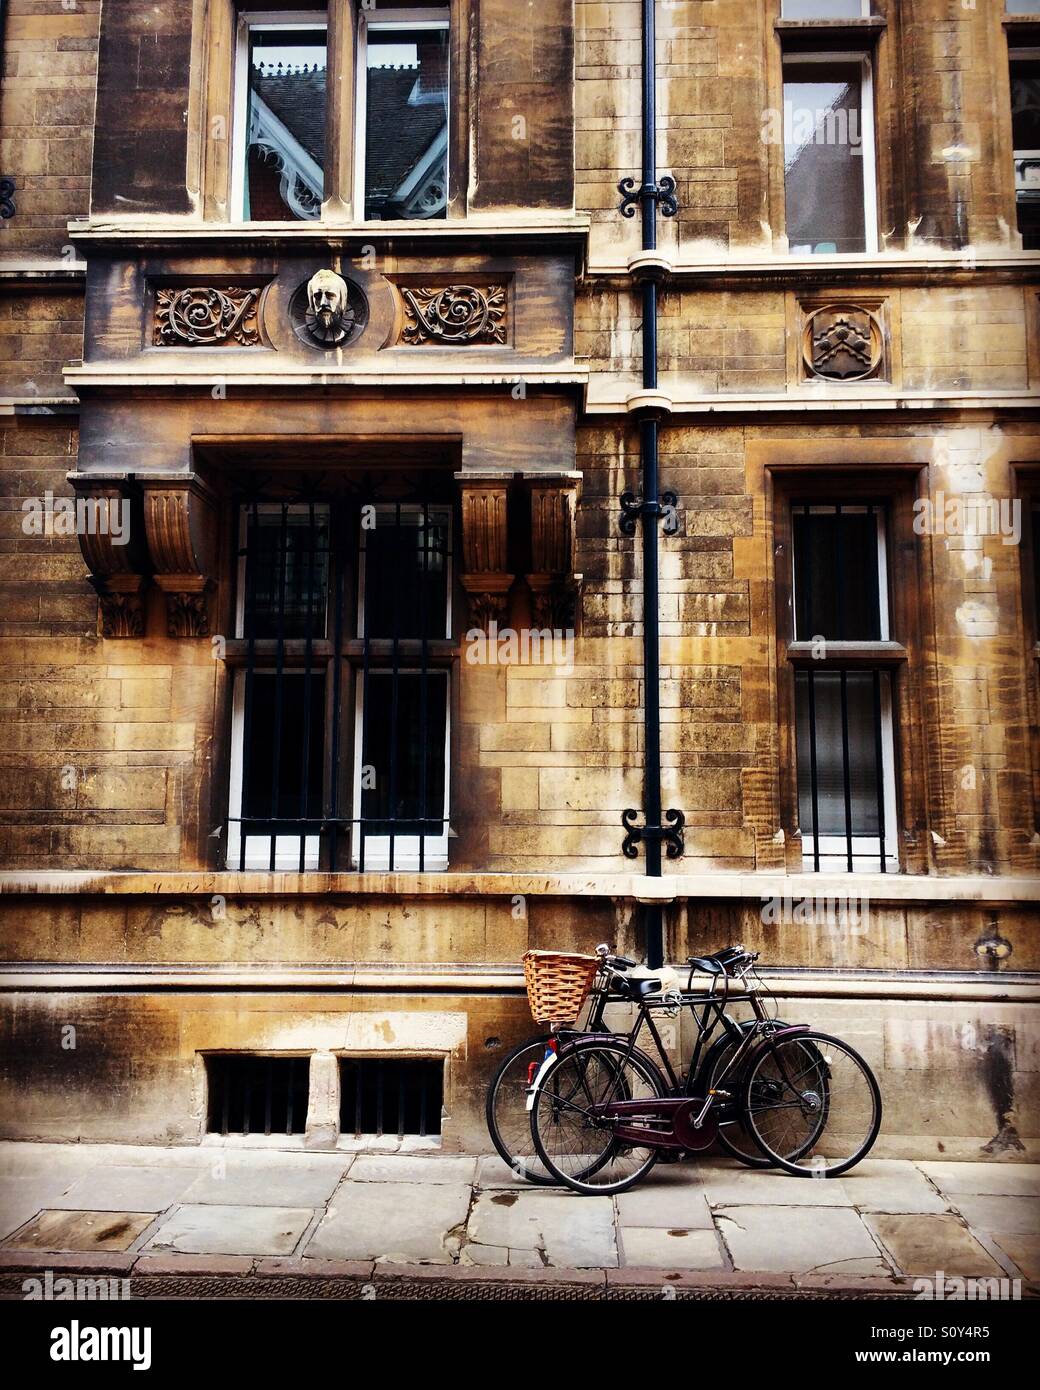 Historical Cambridge city building with bicycles chained to a drainpipe. Stock Photo